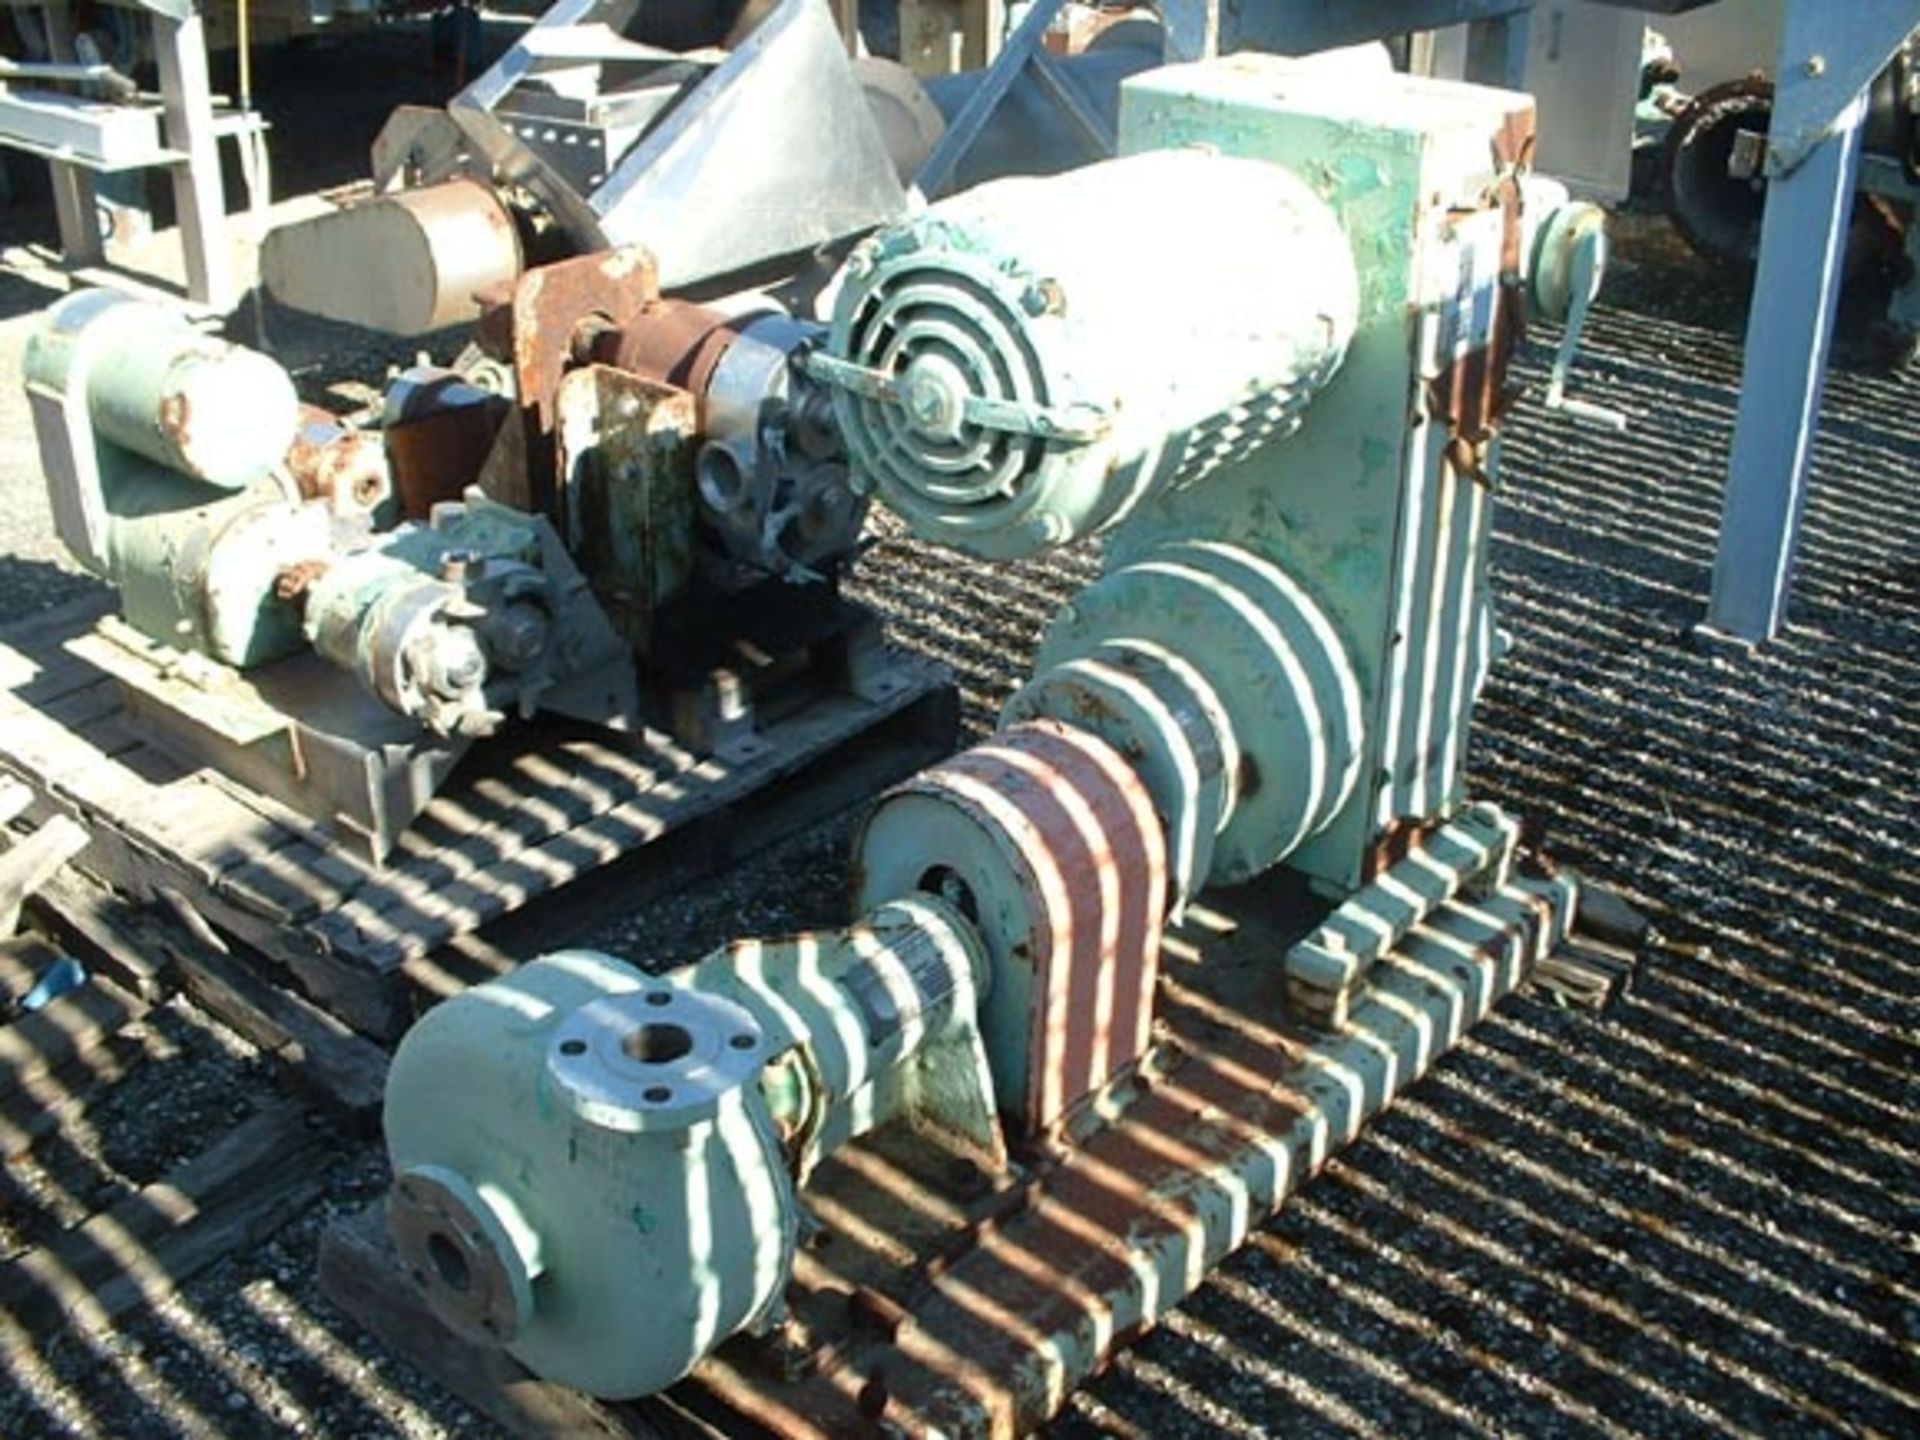 (Located in Morgan Hill, CA) Wemco Pump, SN 72991 16-2, Torque Flow Pump, 316 SS - Size 2 x 11S